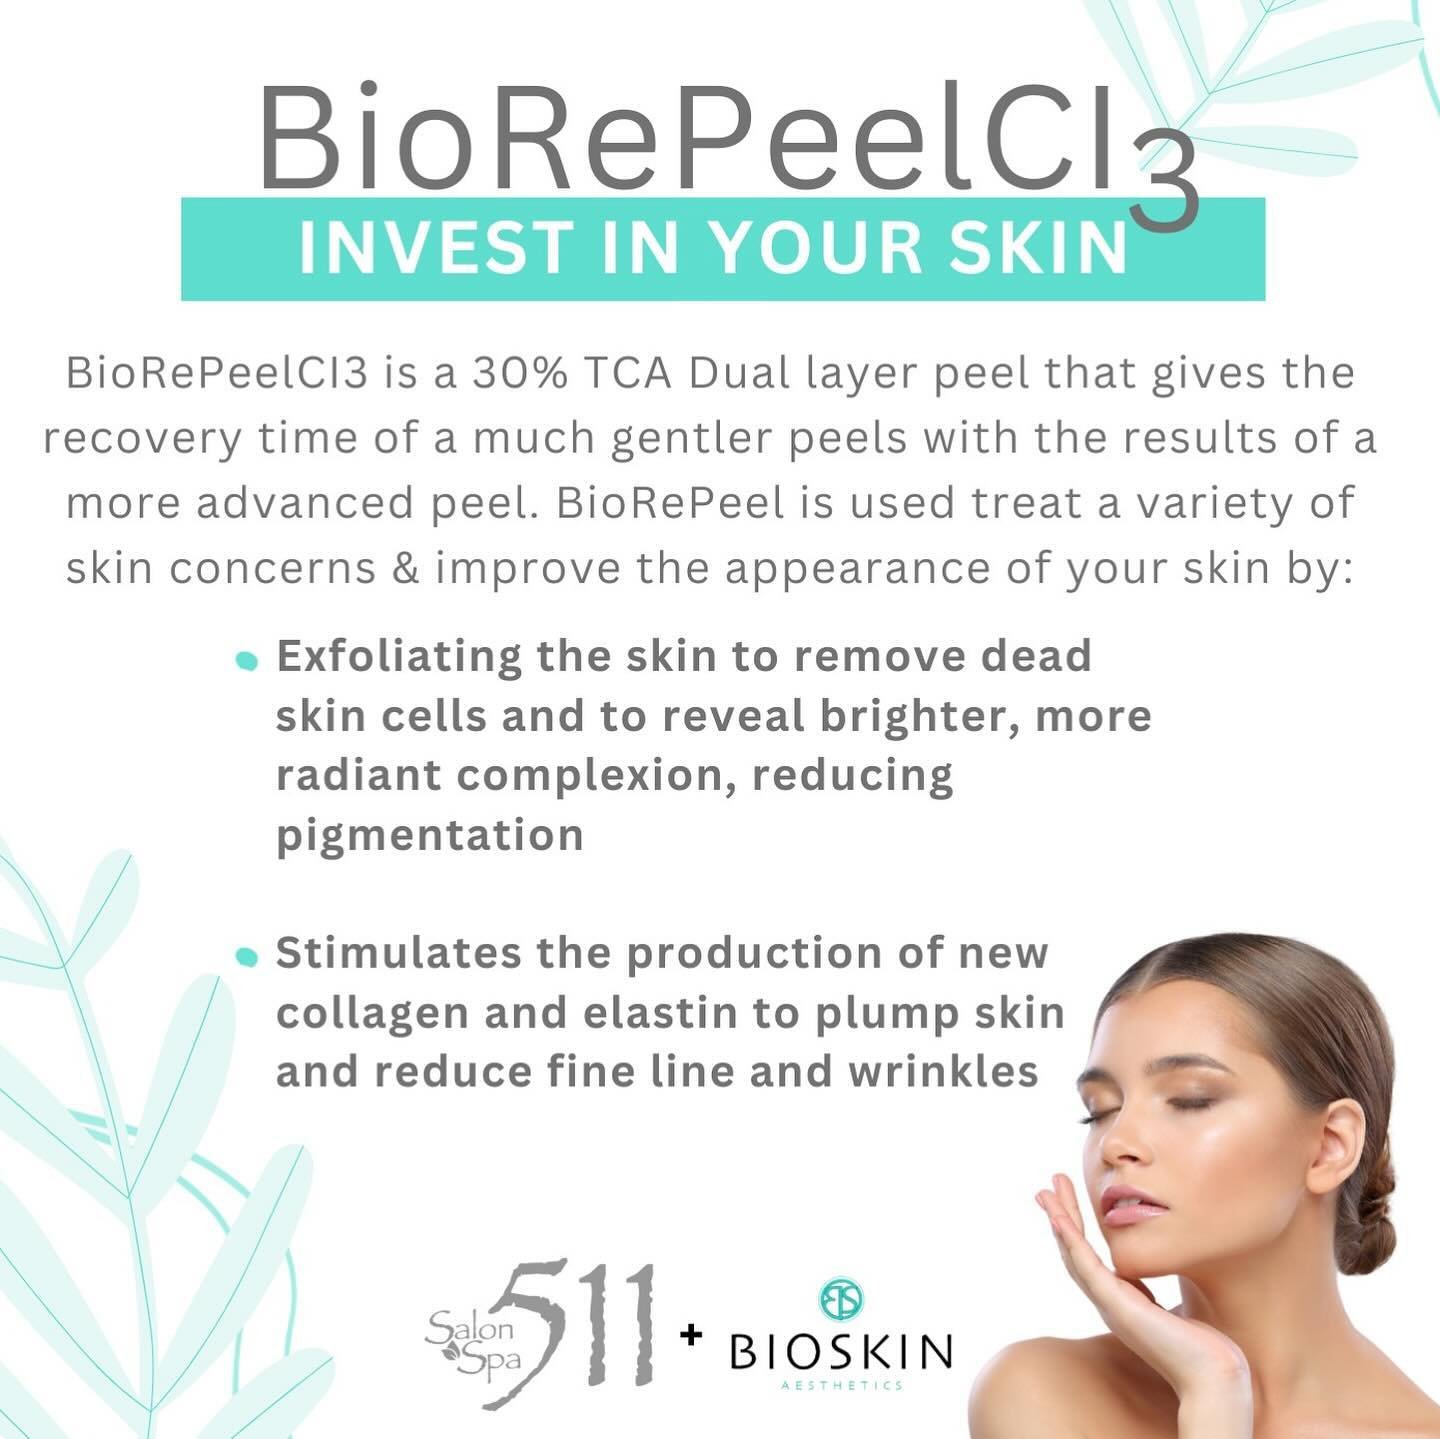 Invest in your skin with the BioRePeelCI3 Face Treatment!! 

This peel is &mdash; Non-Invasive | Painless | Safe for Most Skin Types | No Downtime | Results Visible Within Days

Options to purchase service in a 1, 2 or 4 series. Plus when you purchas